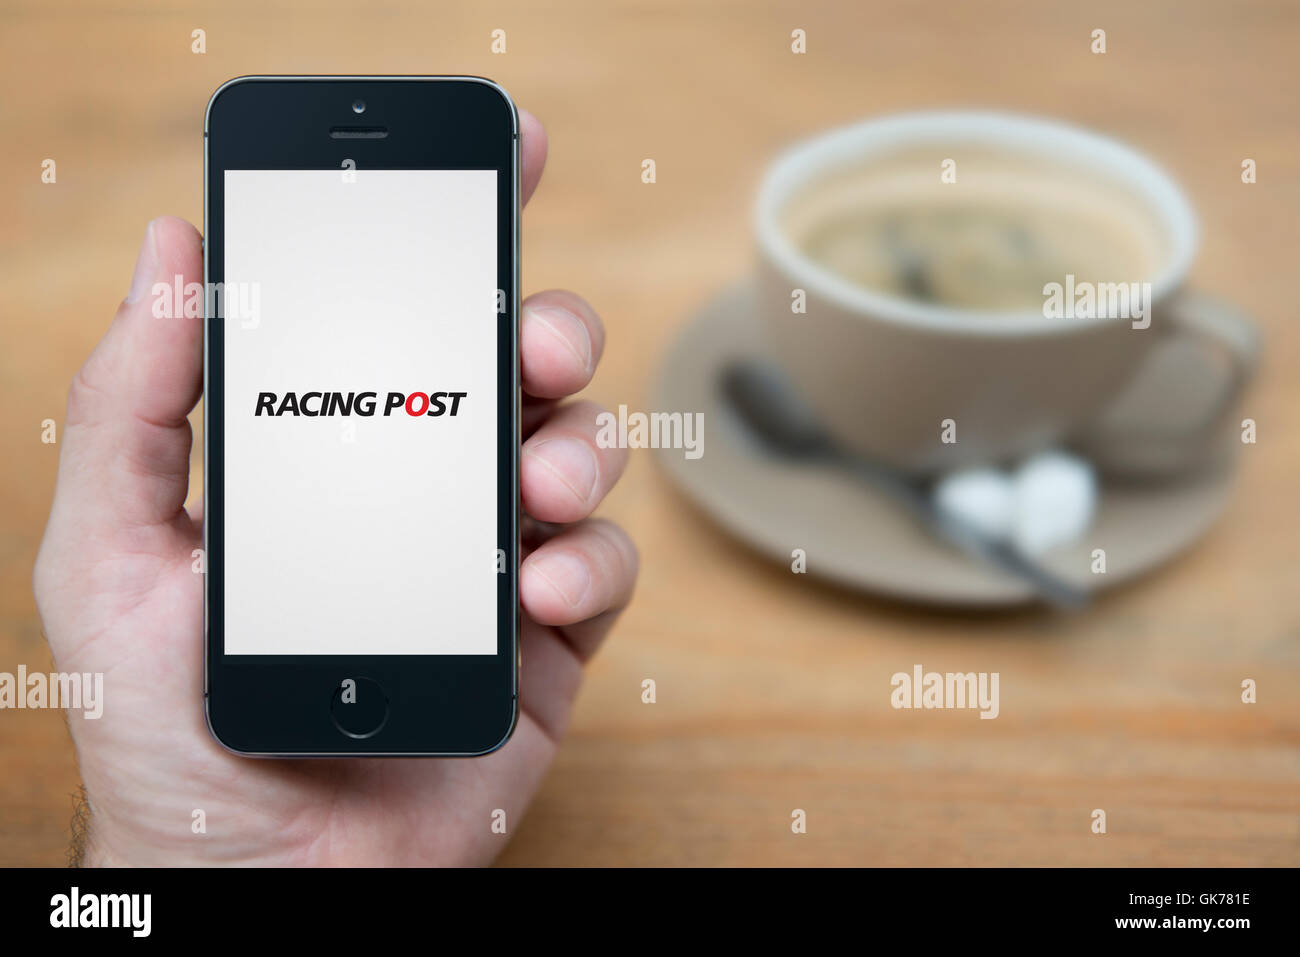 A man looks at his iPhone which displays the Racing Post logo, while sat with a cup of coffee (Editorial use only). Stock Photo